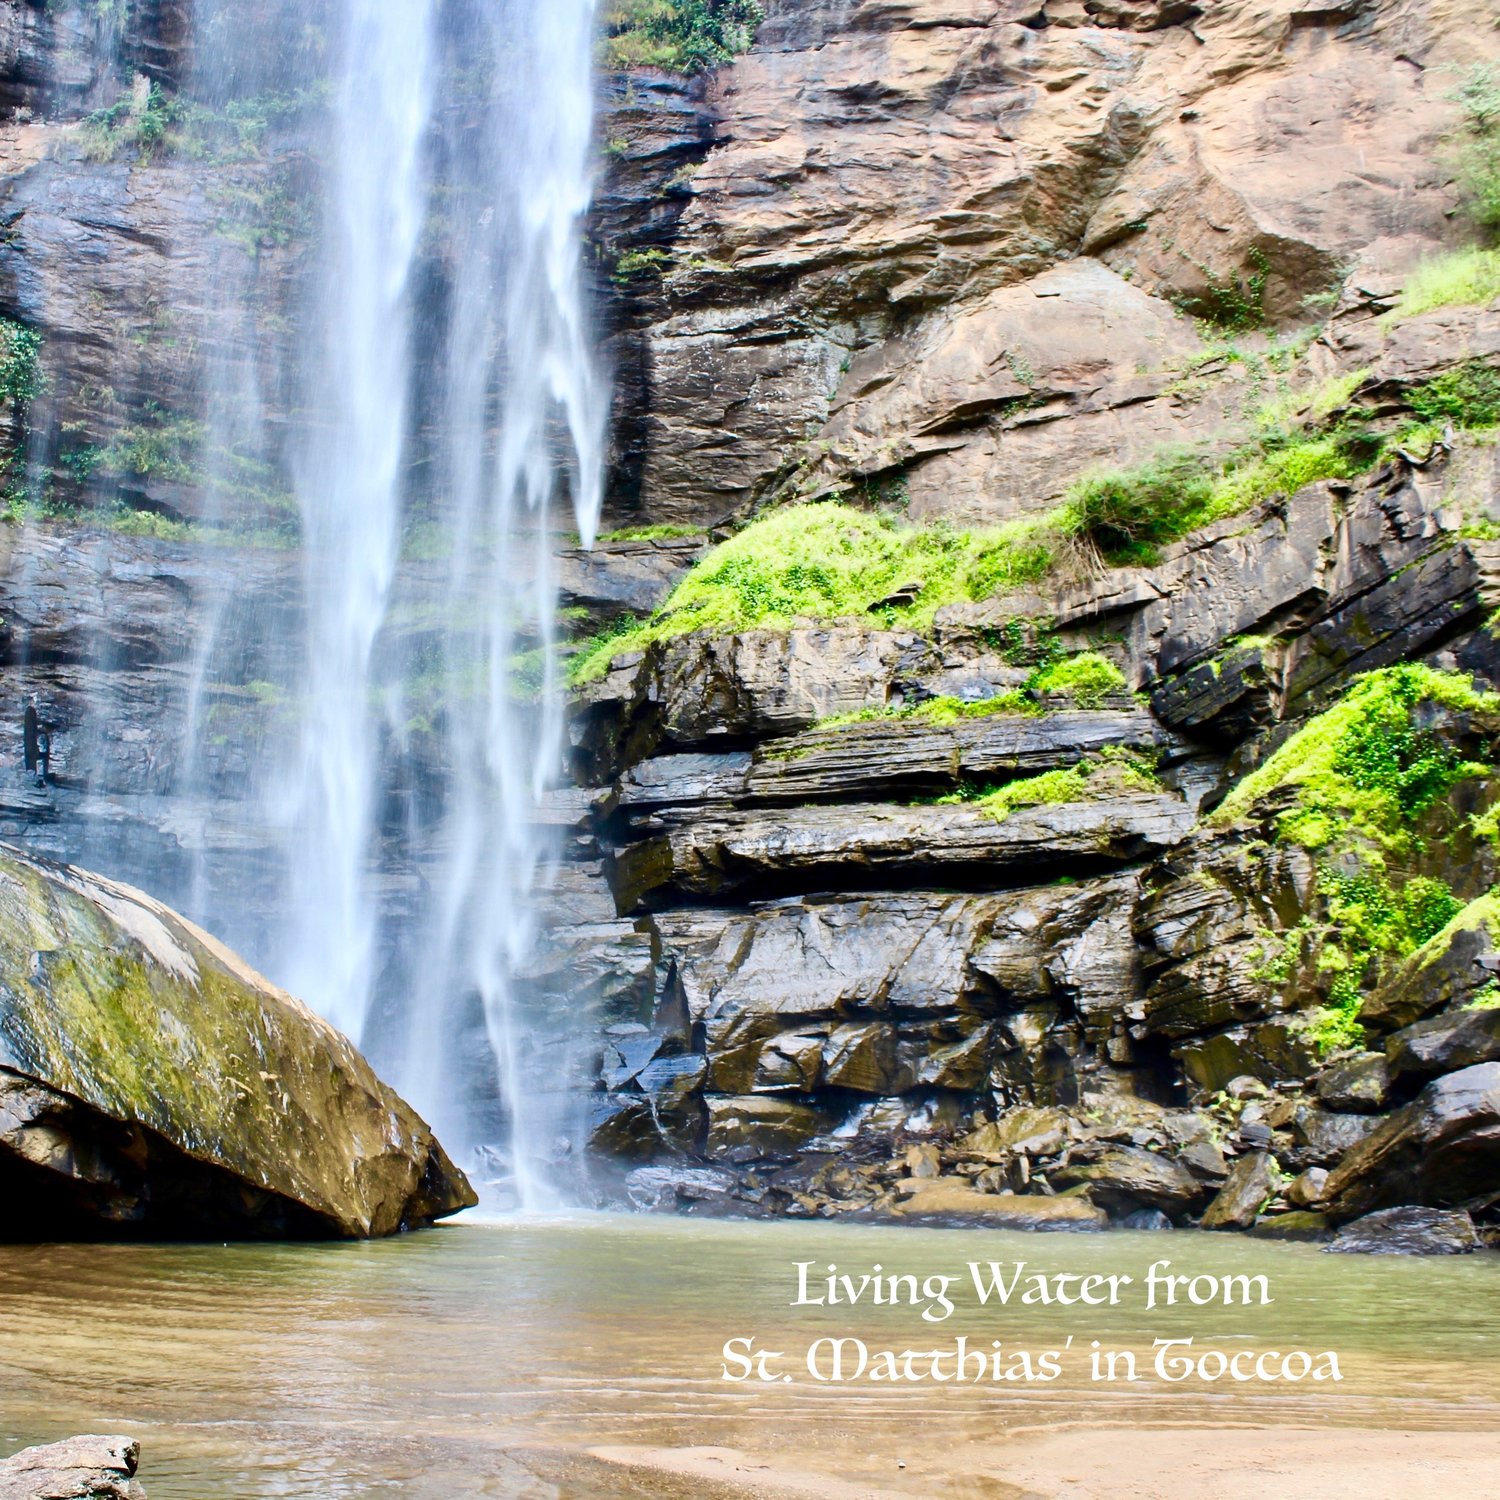 Living Water from St. Matthias' in Toccoa